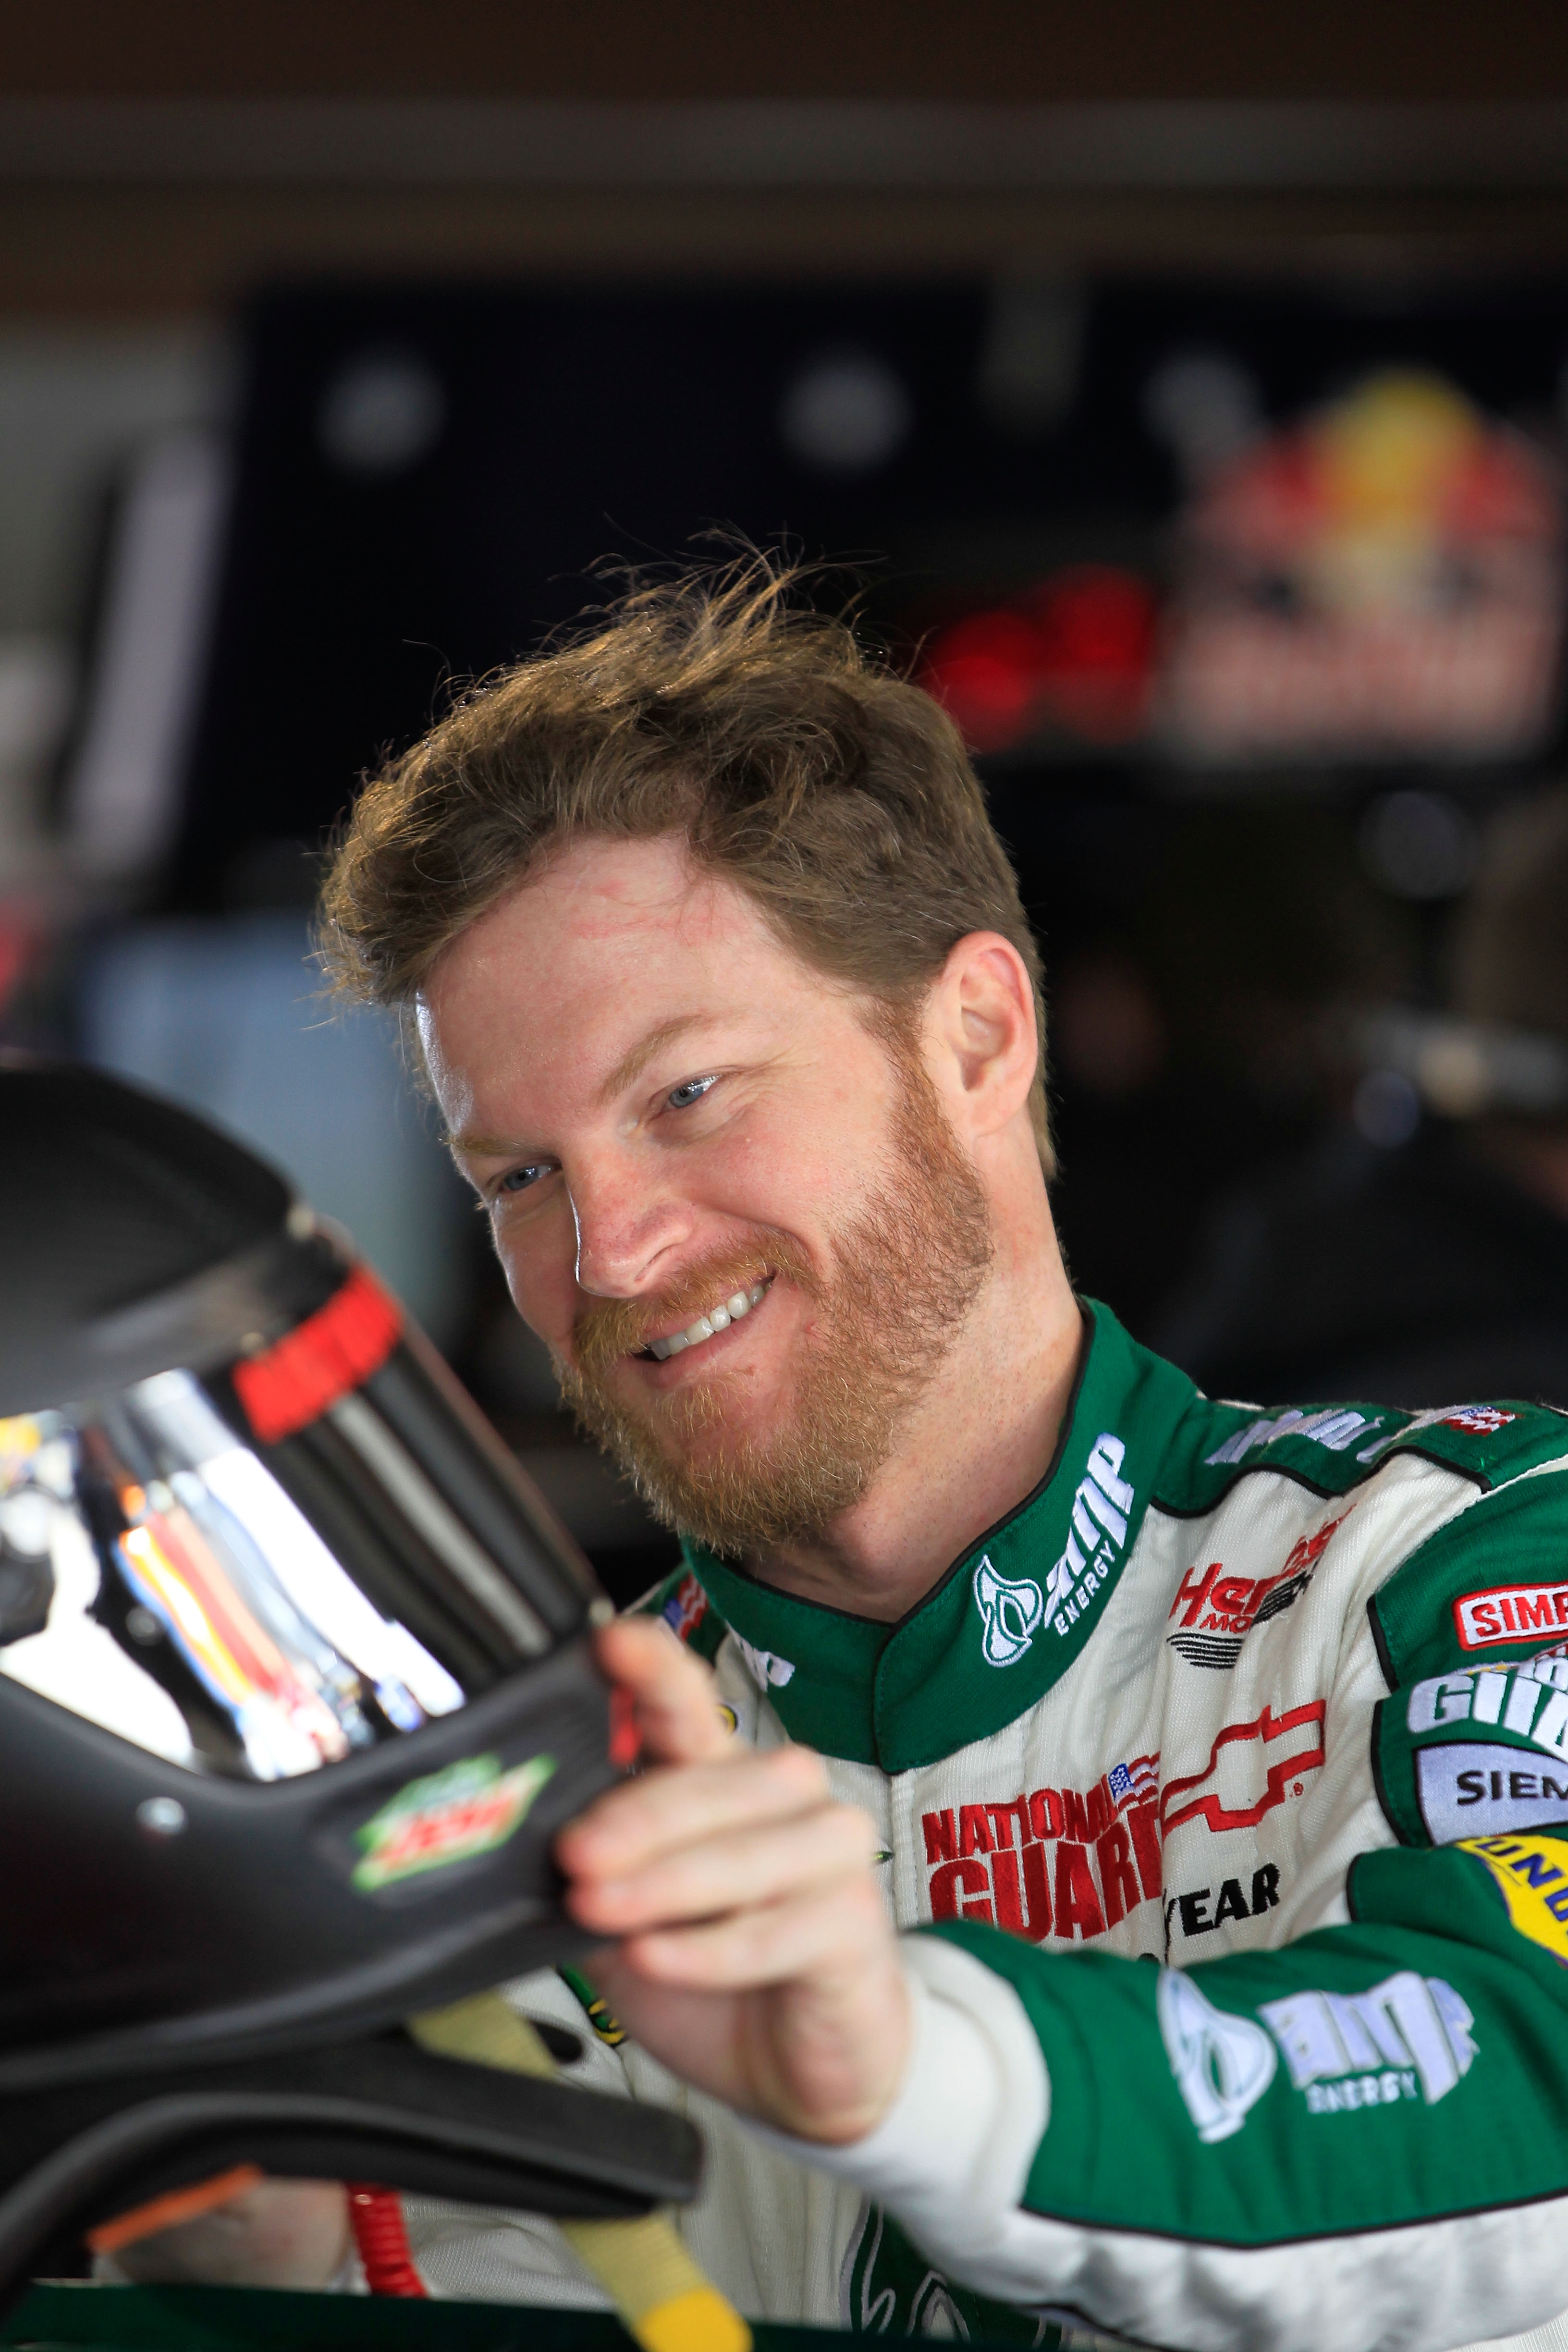 MARTINSVILLE, VA - APRIL 01:  Dale Earnhardt Jr., driver of the #88 Amp Energy/National Guard Chevrolet, puts on his helmet in the garage prior to practice for the NASCAR Sprint Cup Series Goody's Fast Relief 500 at Martinsville Speedway on April 1, 2011